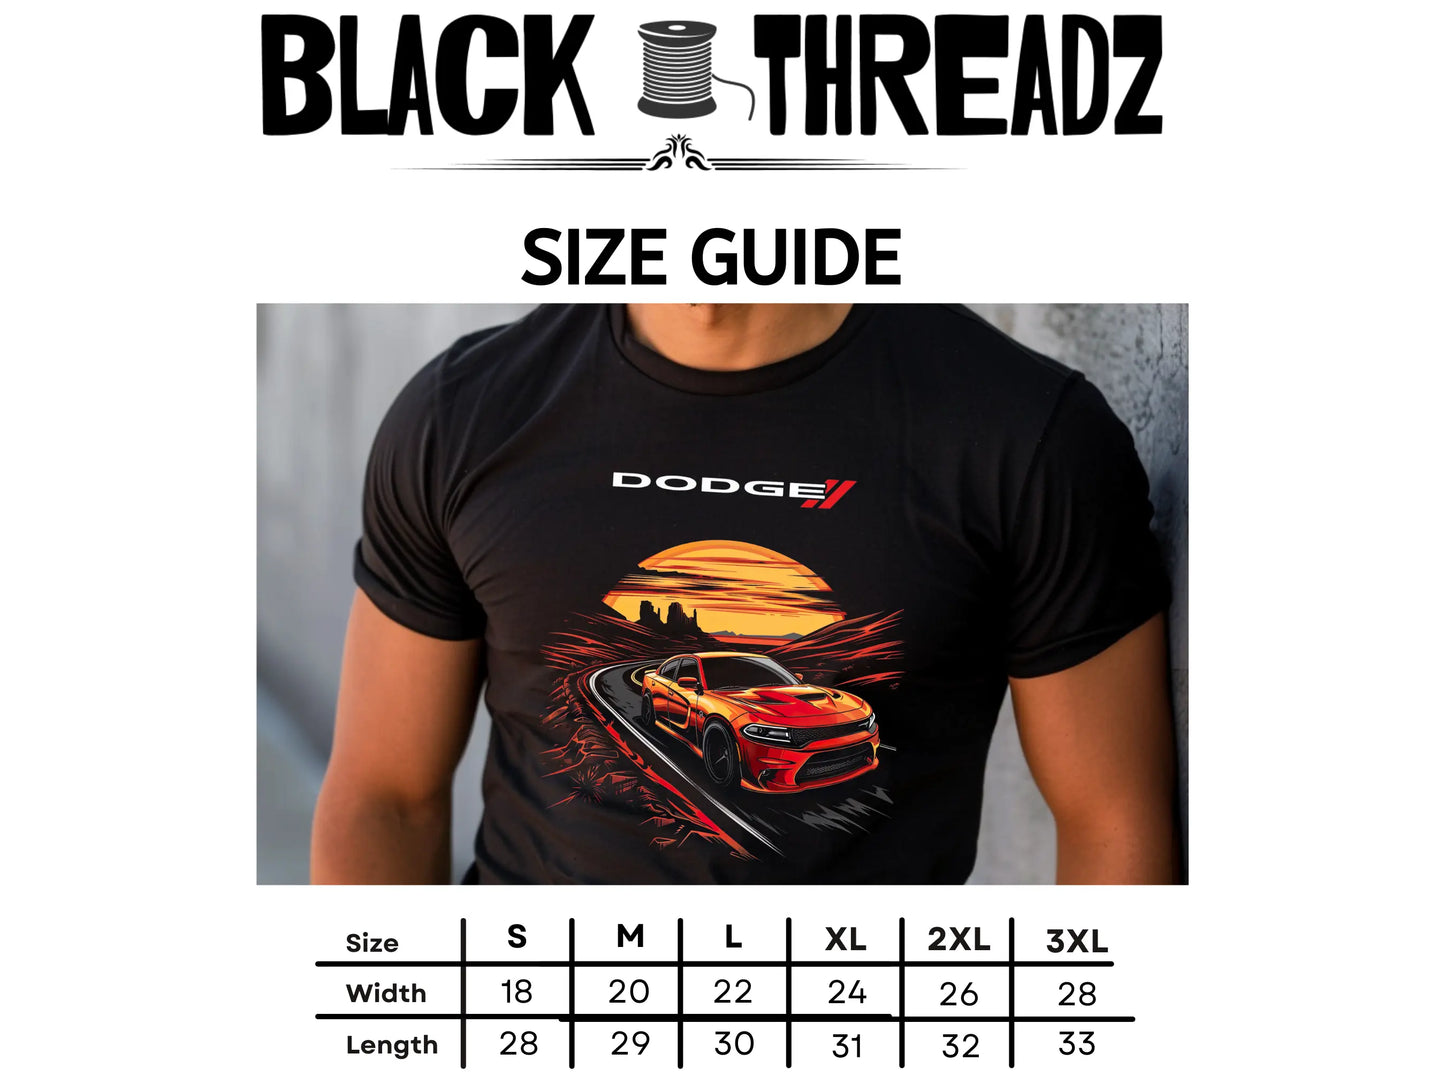 Basketball Player T-Shirt: Embrace the Game in Style - Black Threadz